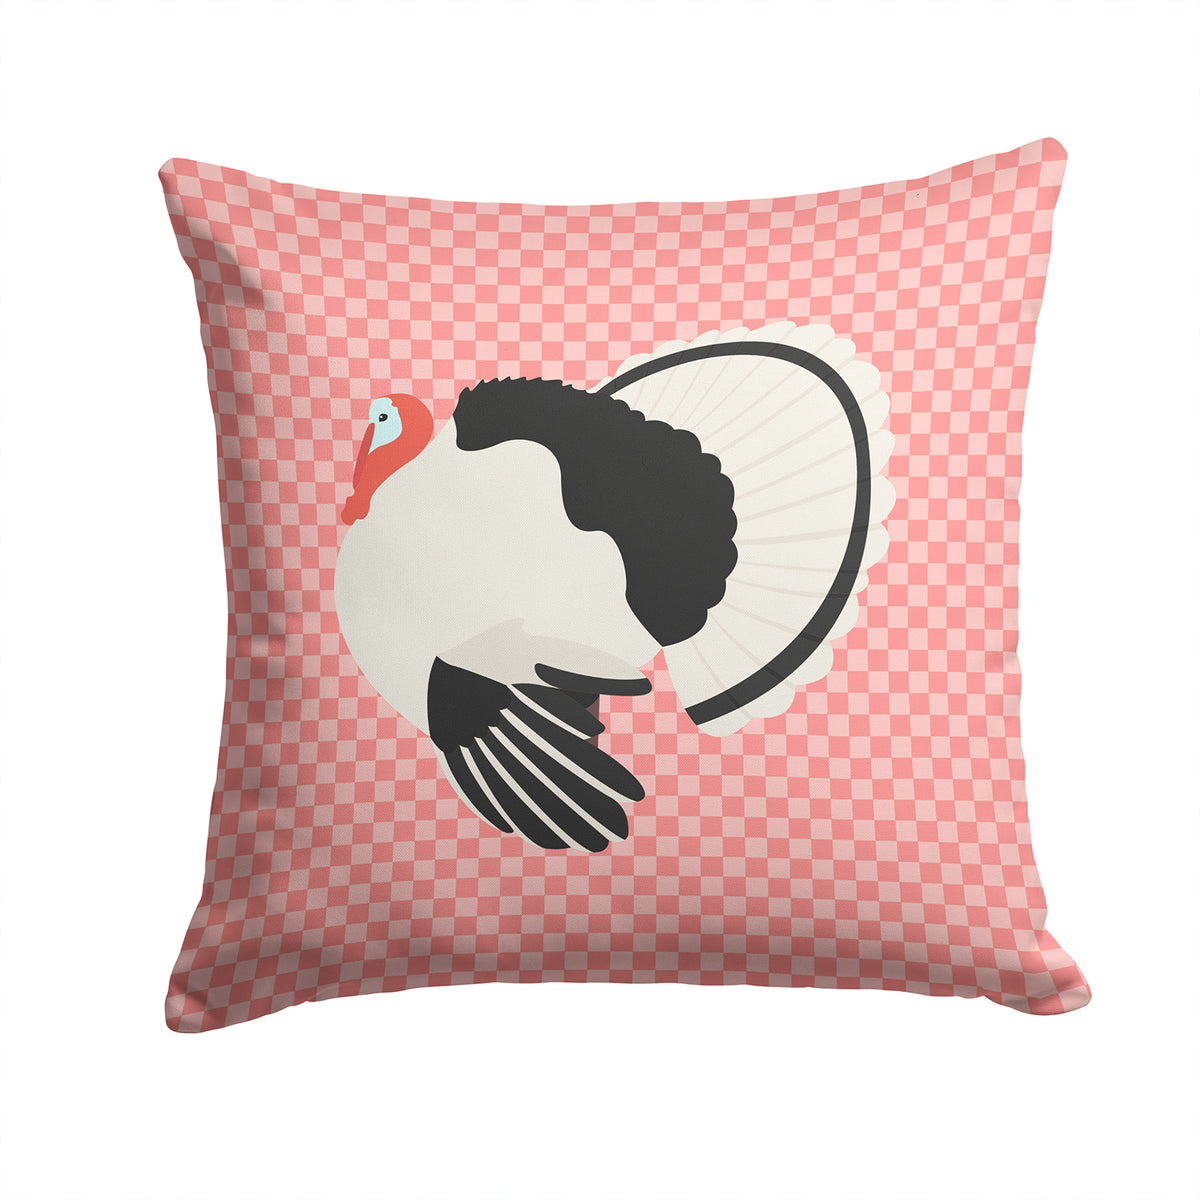 Royal Palm Turkey Pink Check Fabric Decorative Pillow BB7988PW1414 - the-store.com